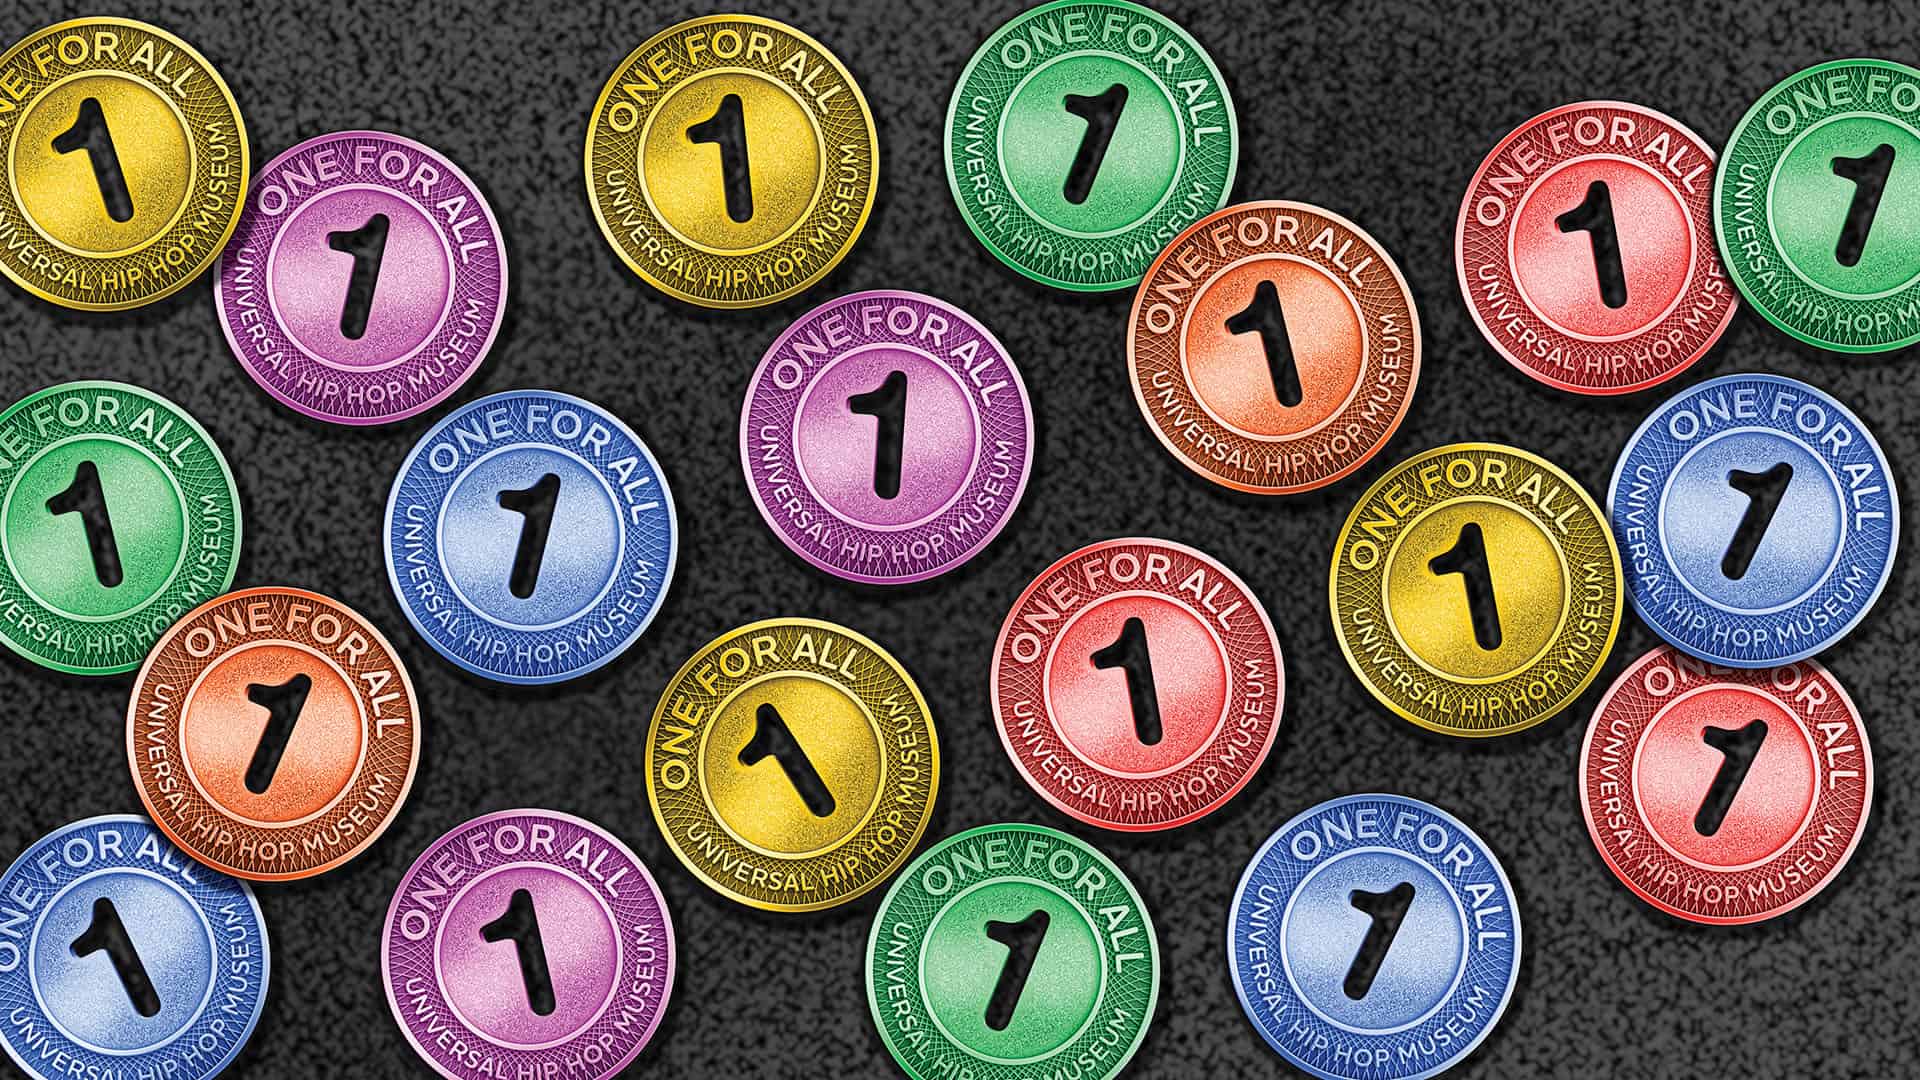 Universal Hip Hop Museum Replicate Subway Tokens designed for One for All Campaign